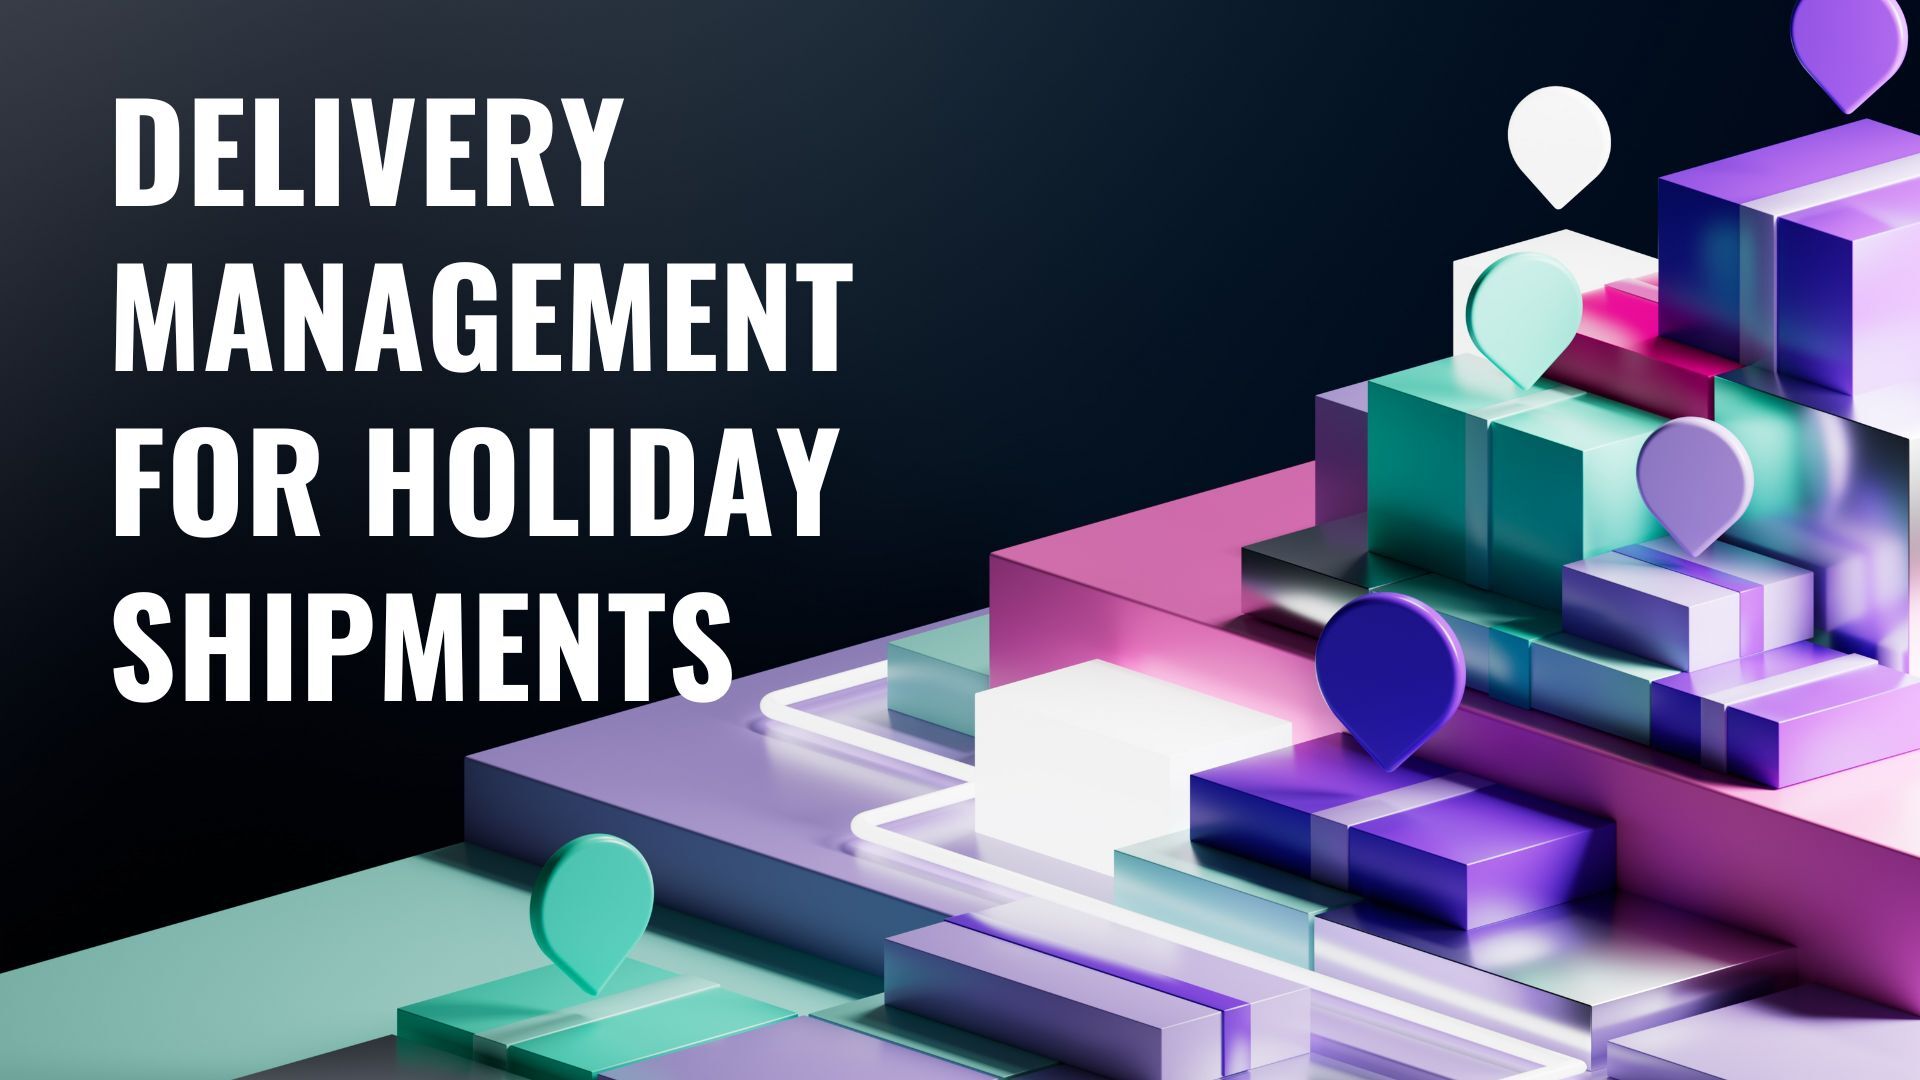 Delivery management for the holidays